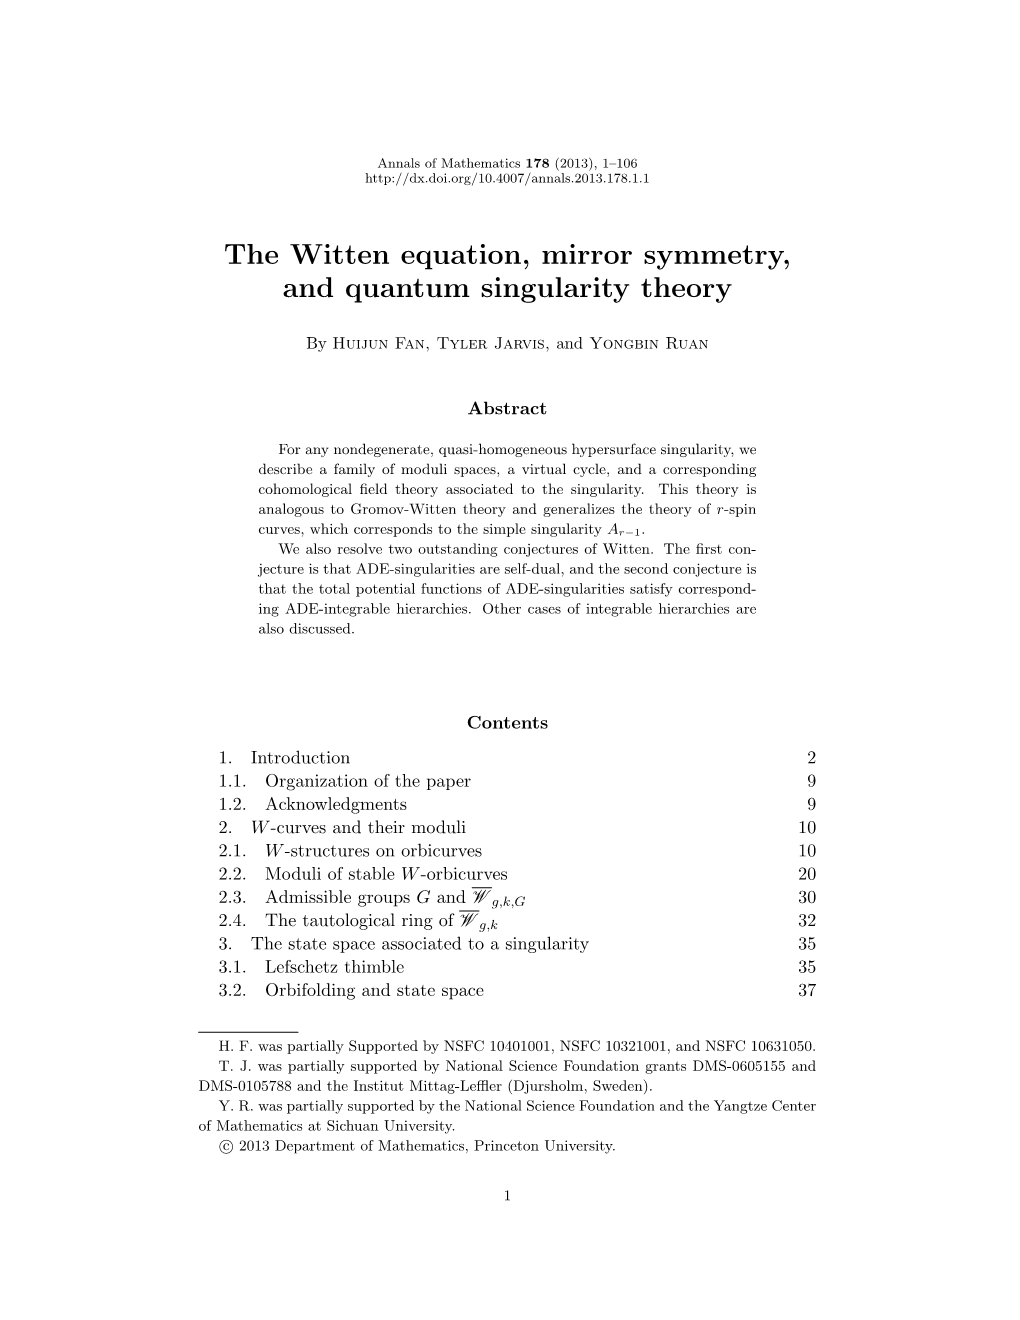 The Witten Equation, Mirror Symmetry, and Quantum Singularity Theory